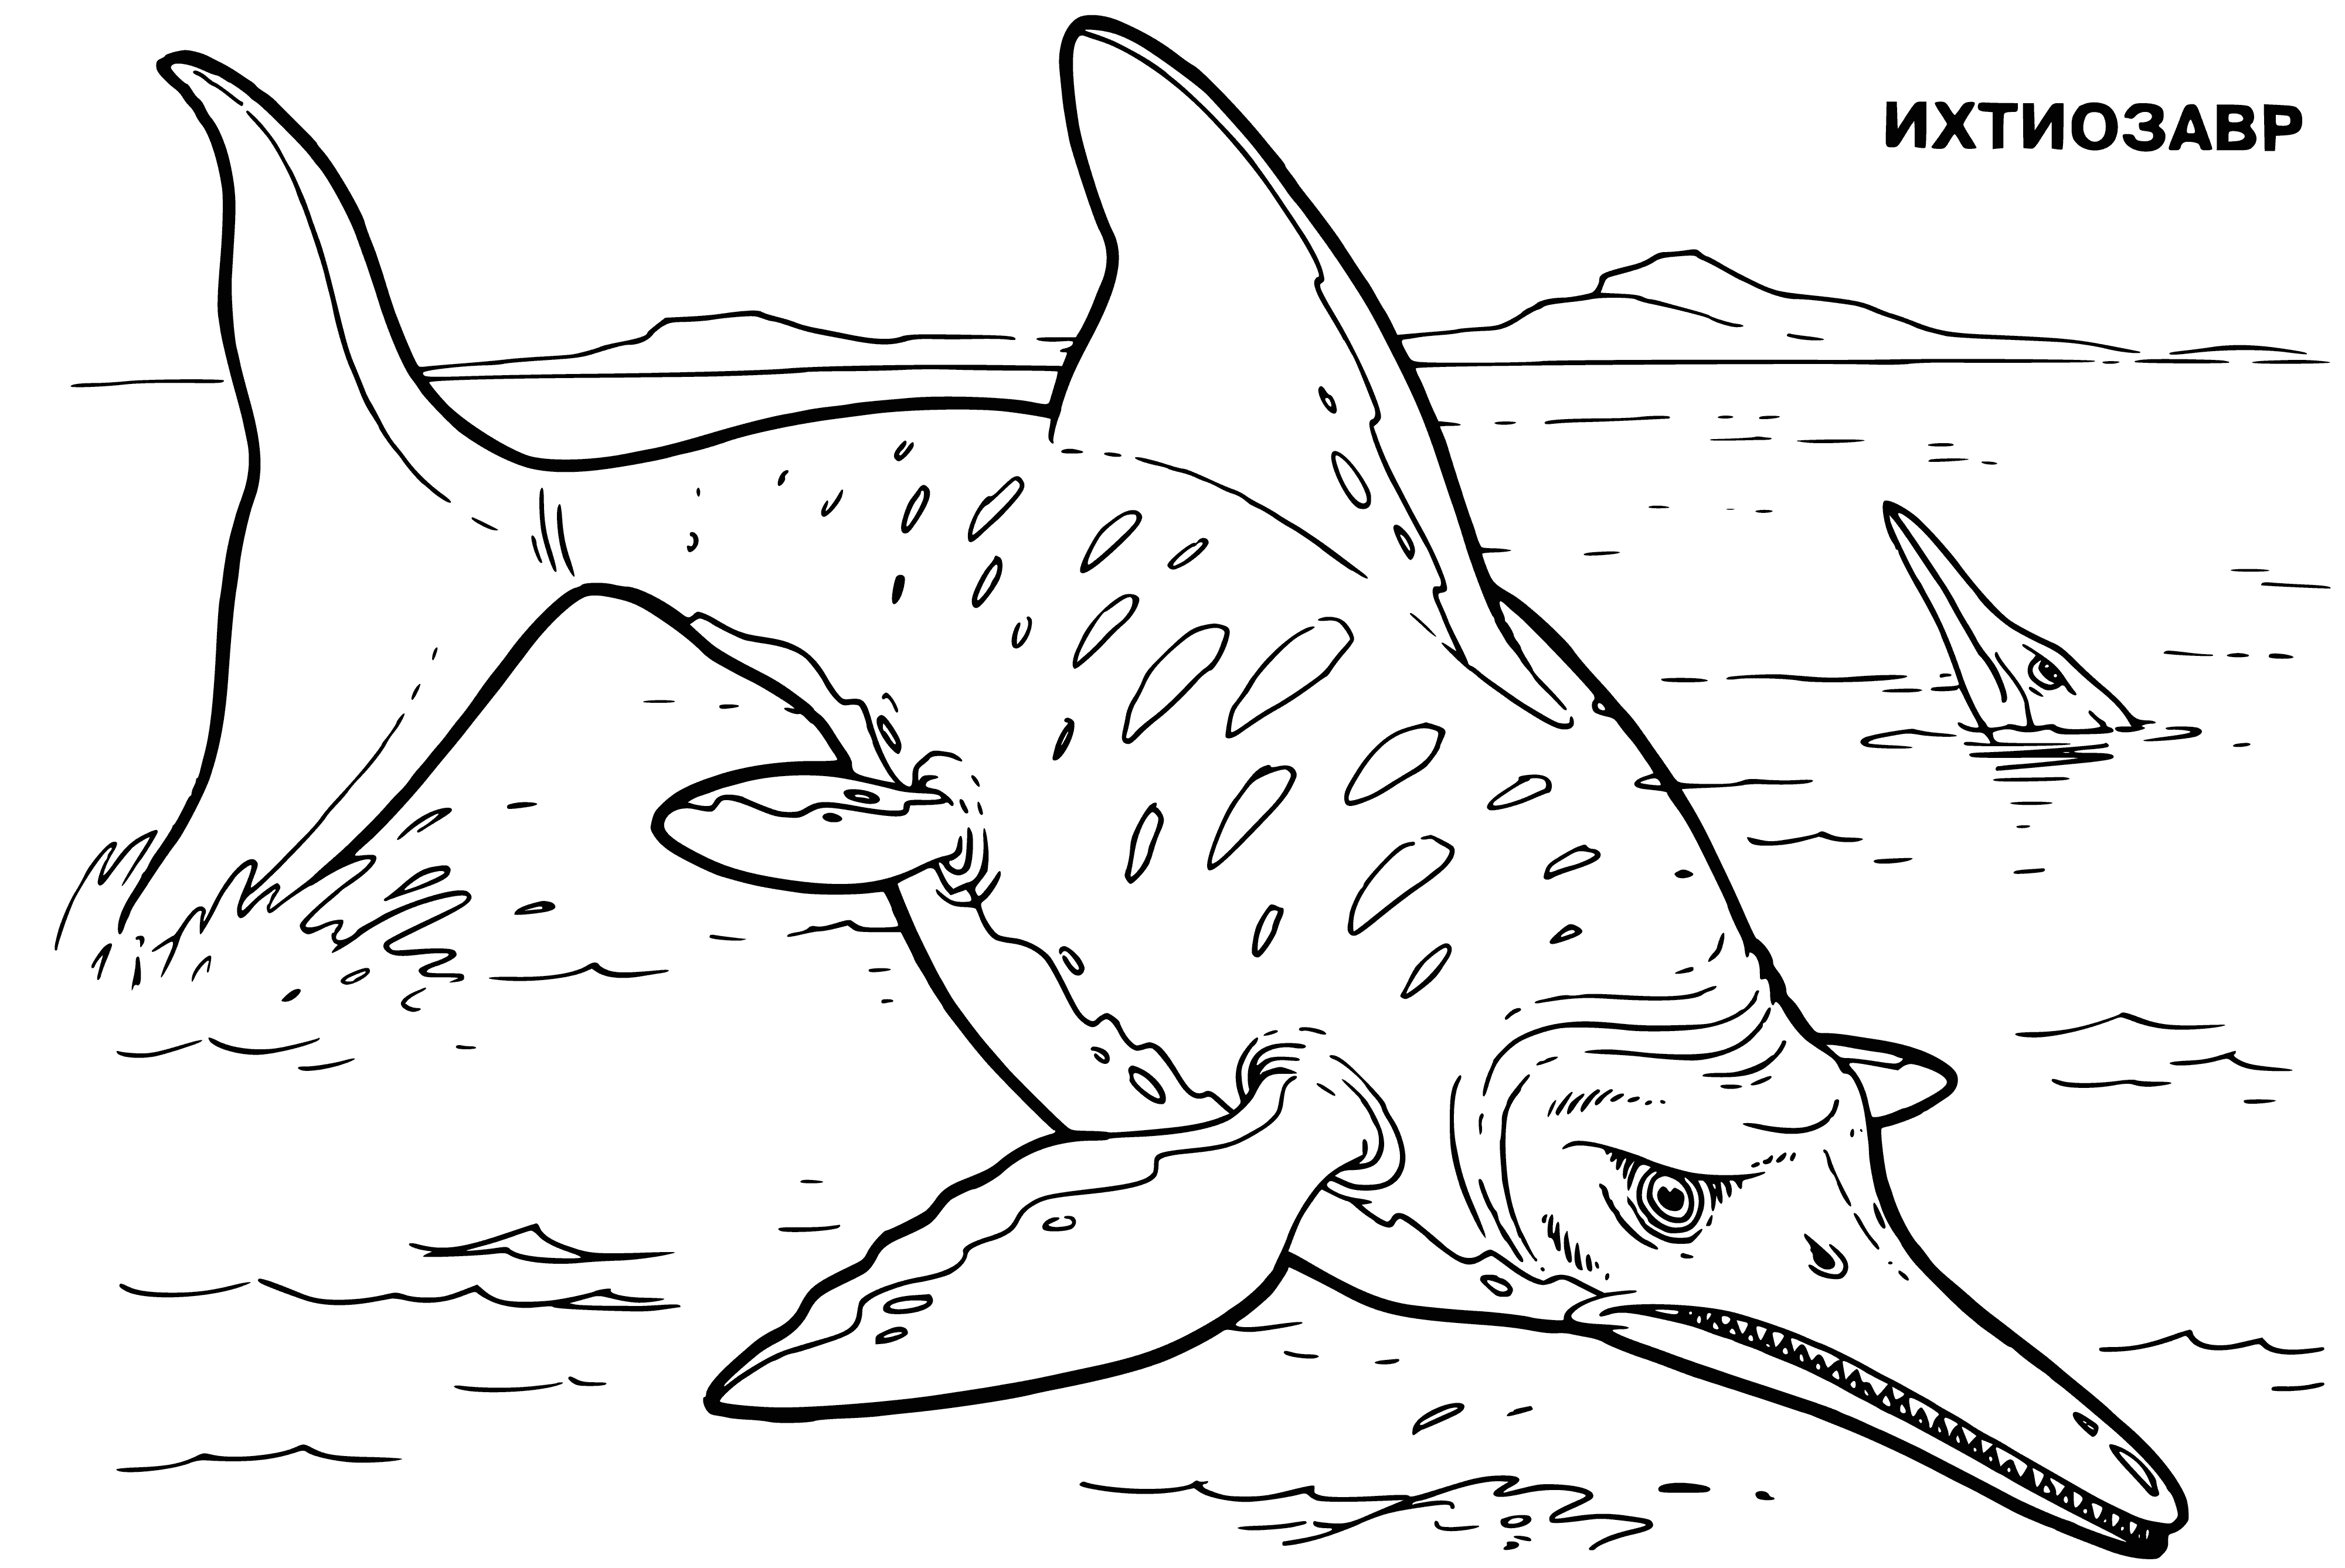 coloring page: Giant blue sea creature with long neck, tail, and four flippers; two eyes atop head.